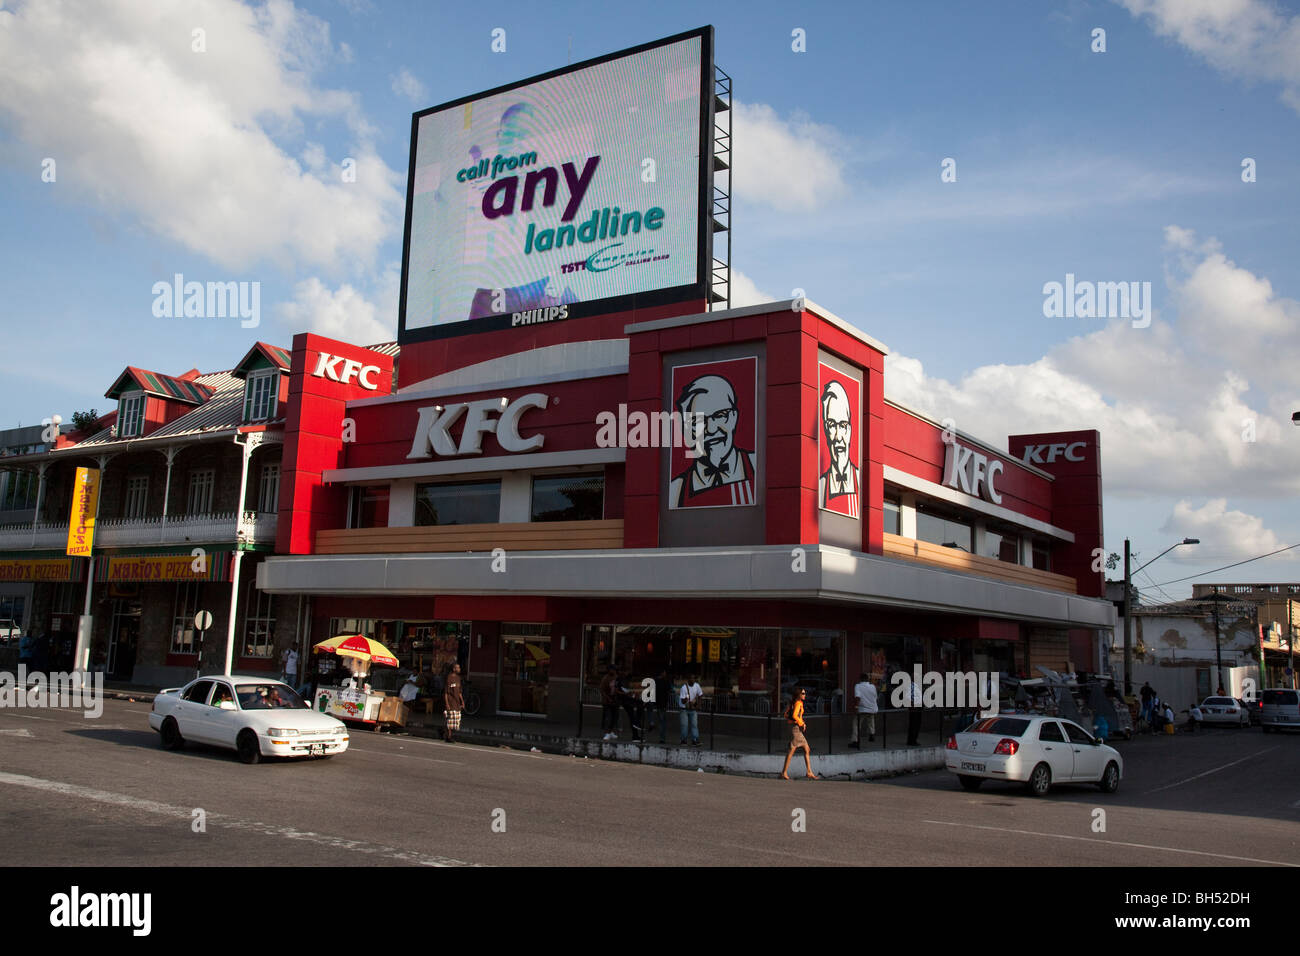 KFC that sells the most chicken of any franchise in the world, Port of Spain, Trinidad Stock Photo